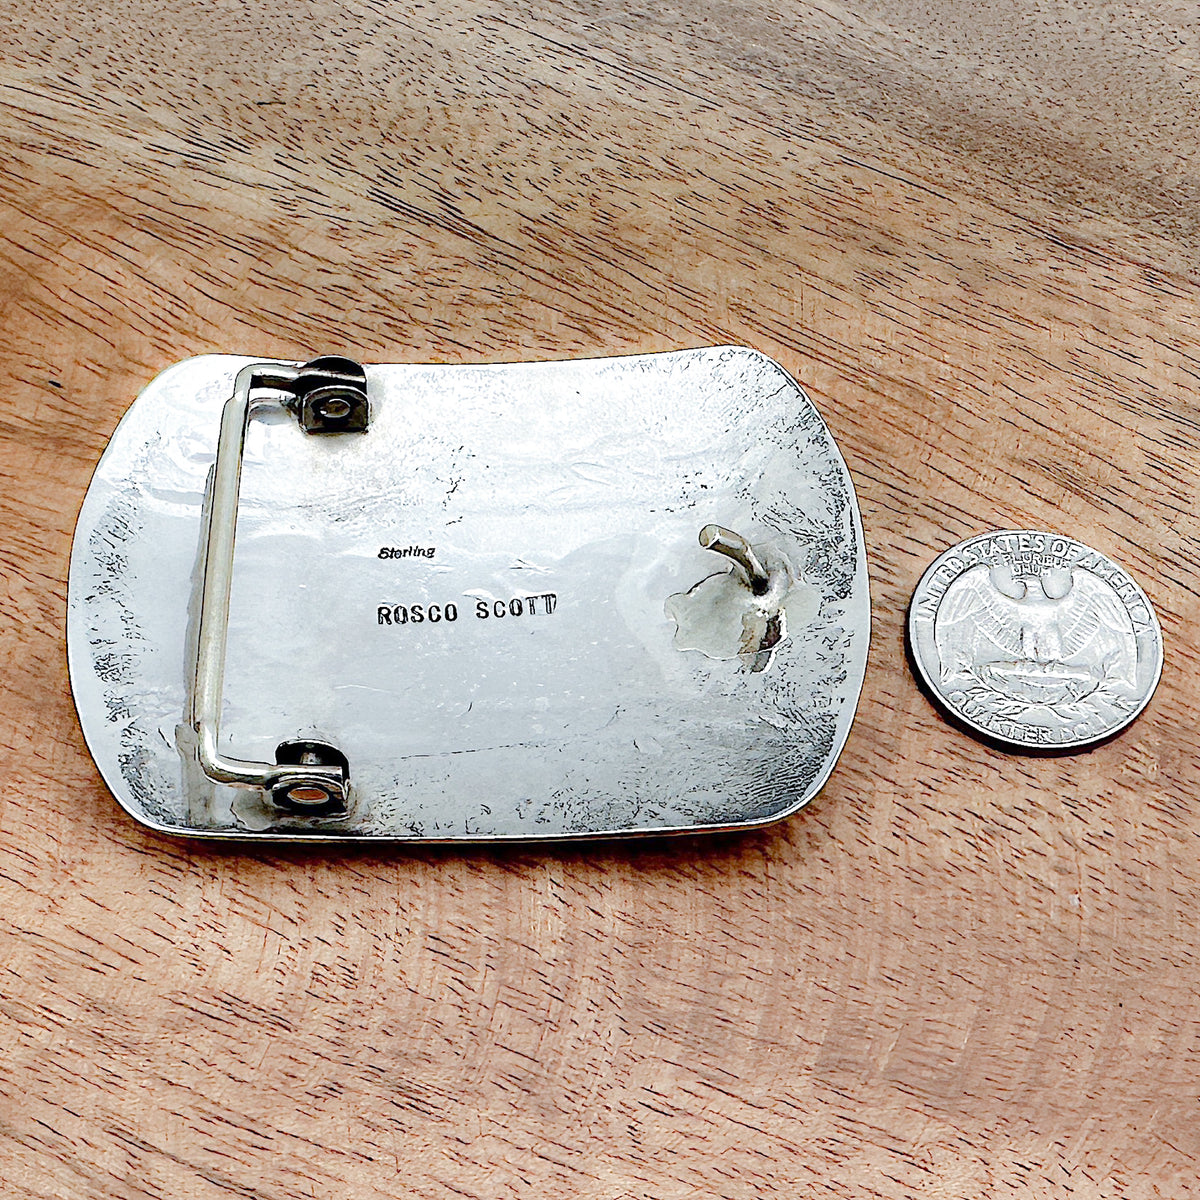 Comparison shot of backside of silver bear paw belt buckle and a US quarter coin